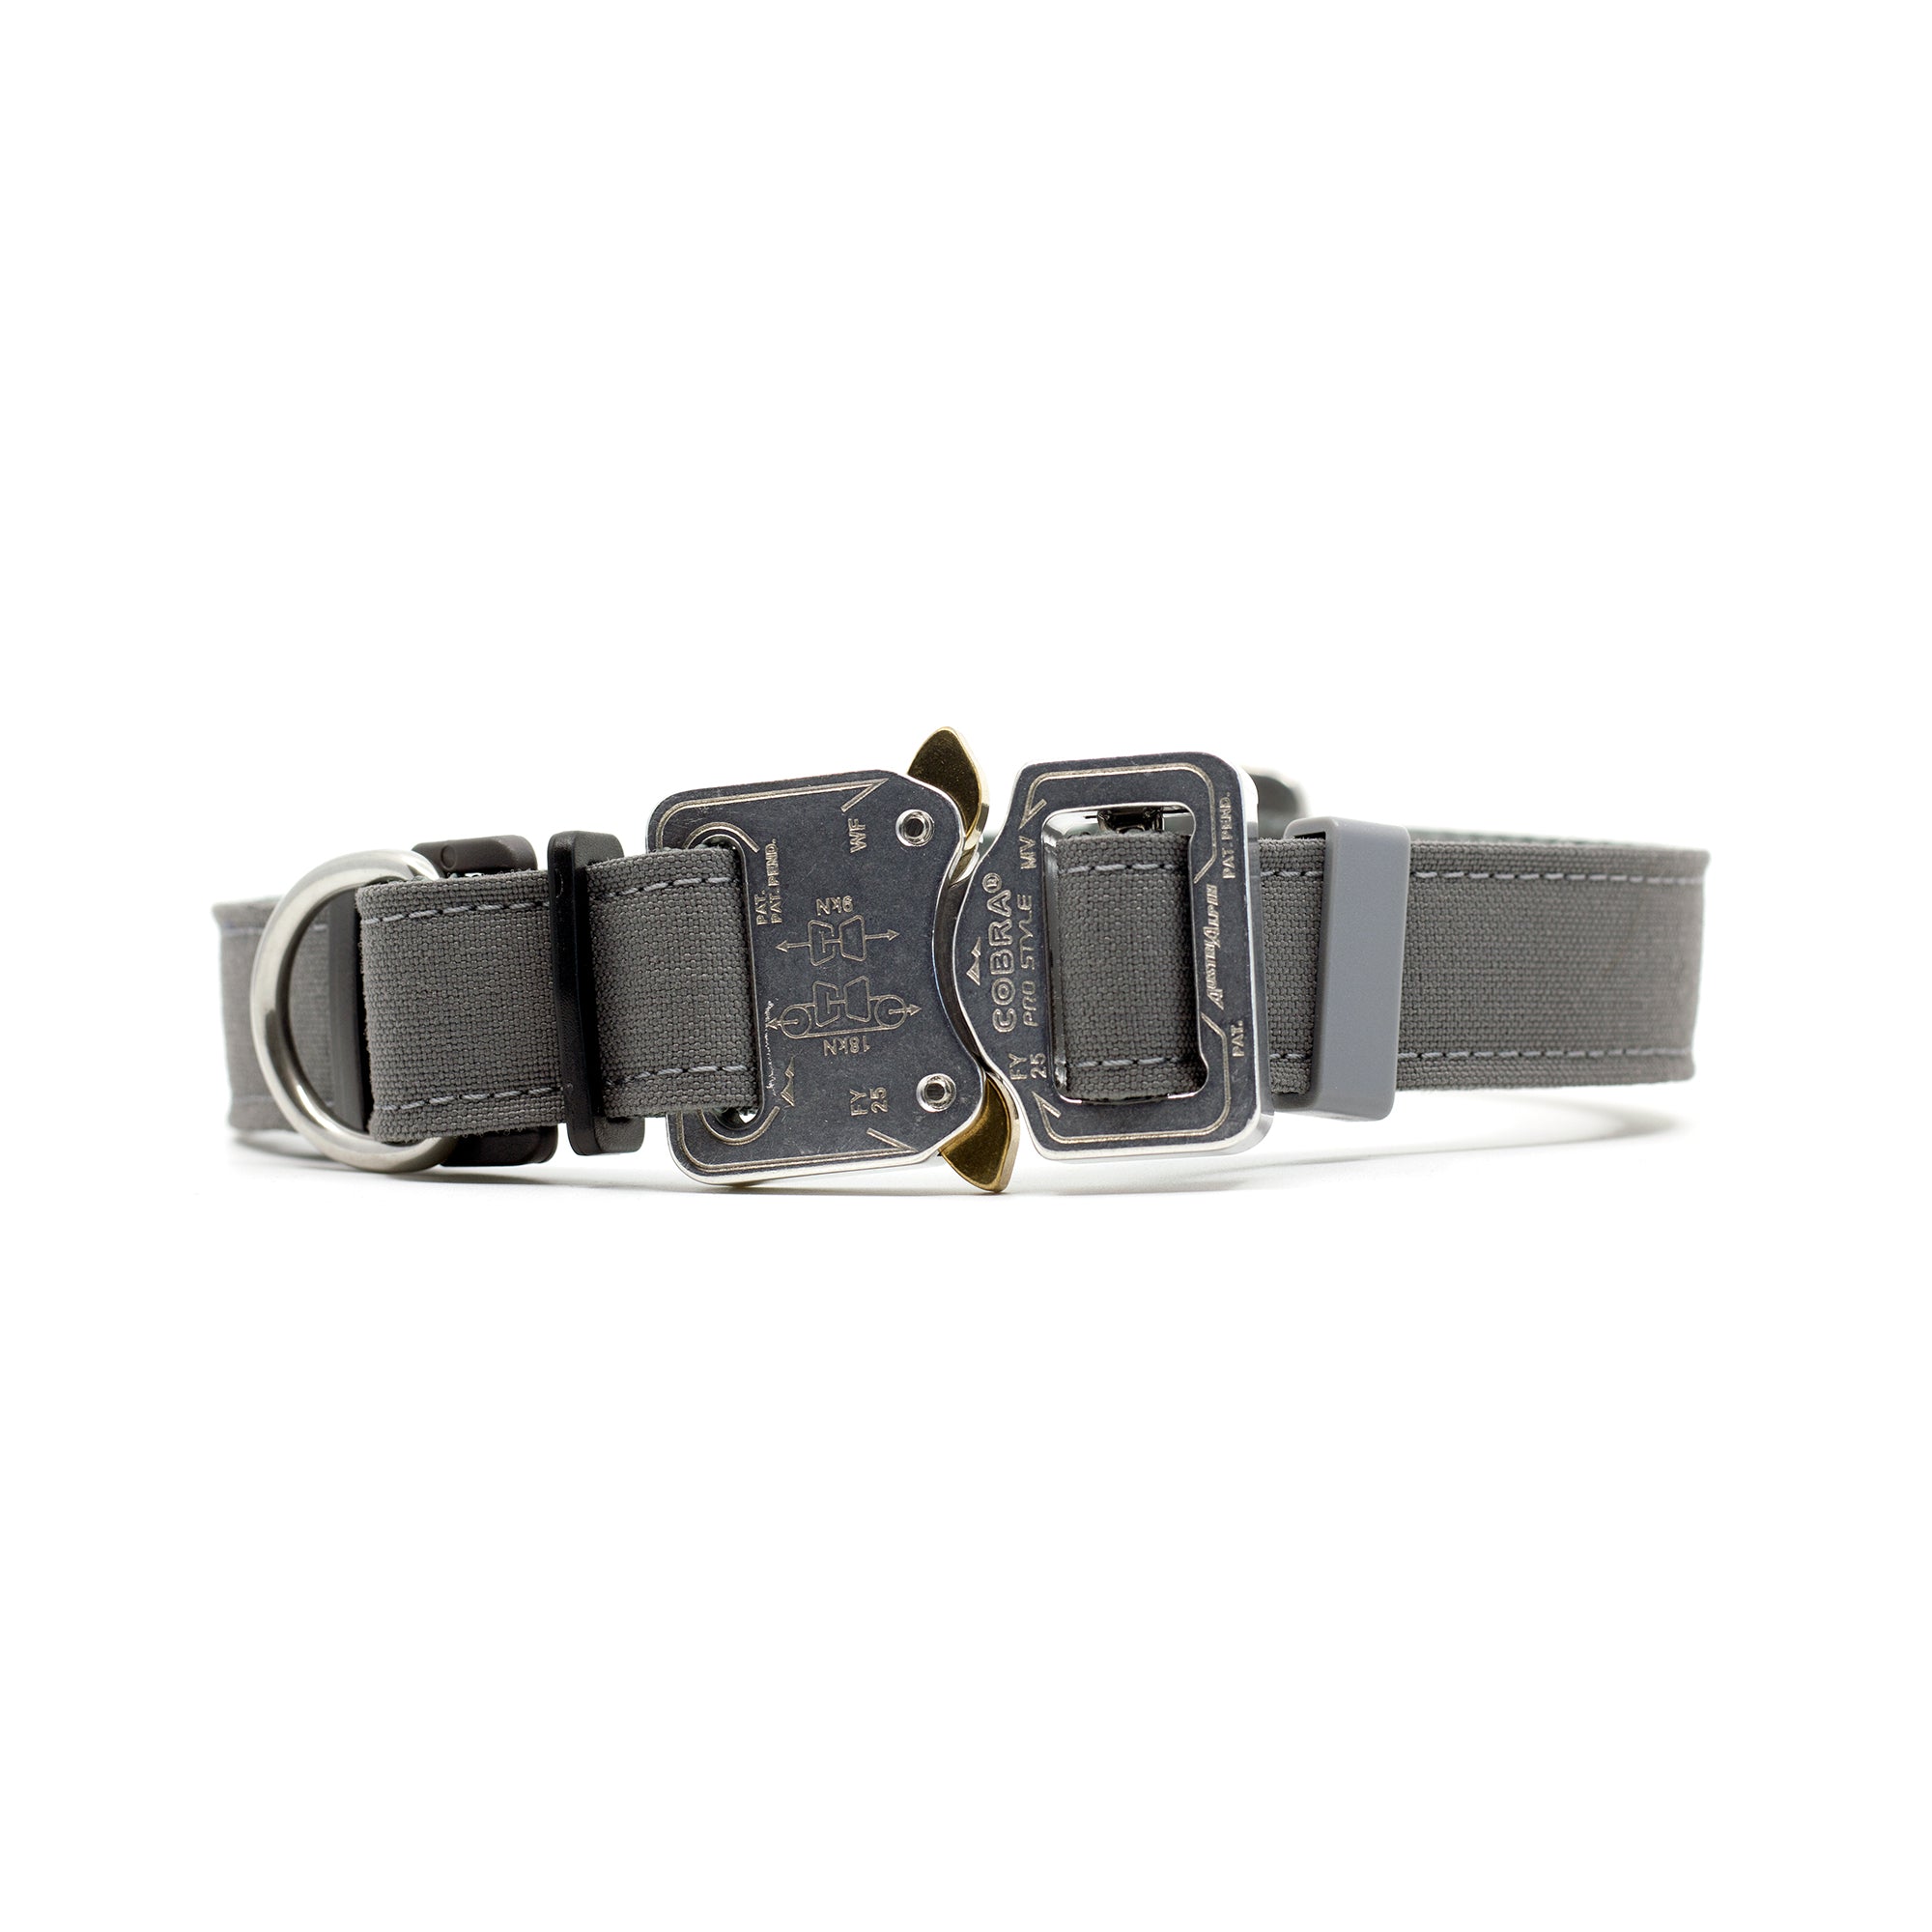 Tactical Cobra Dog Collar with Handle - Wolf Gray